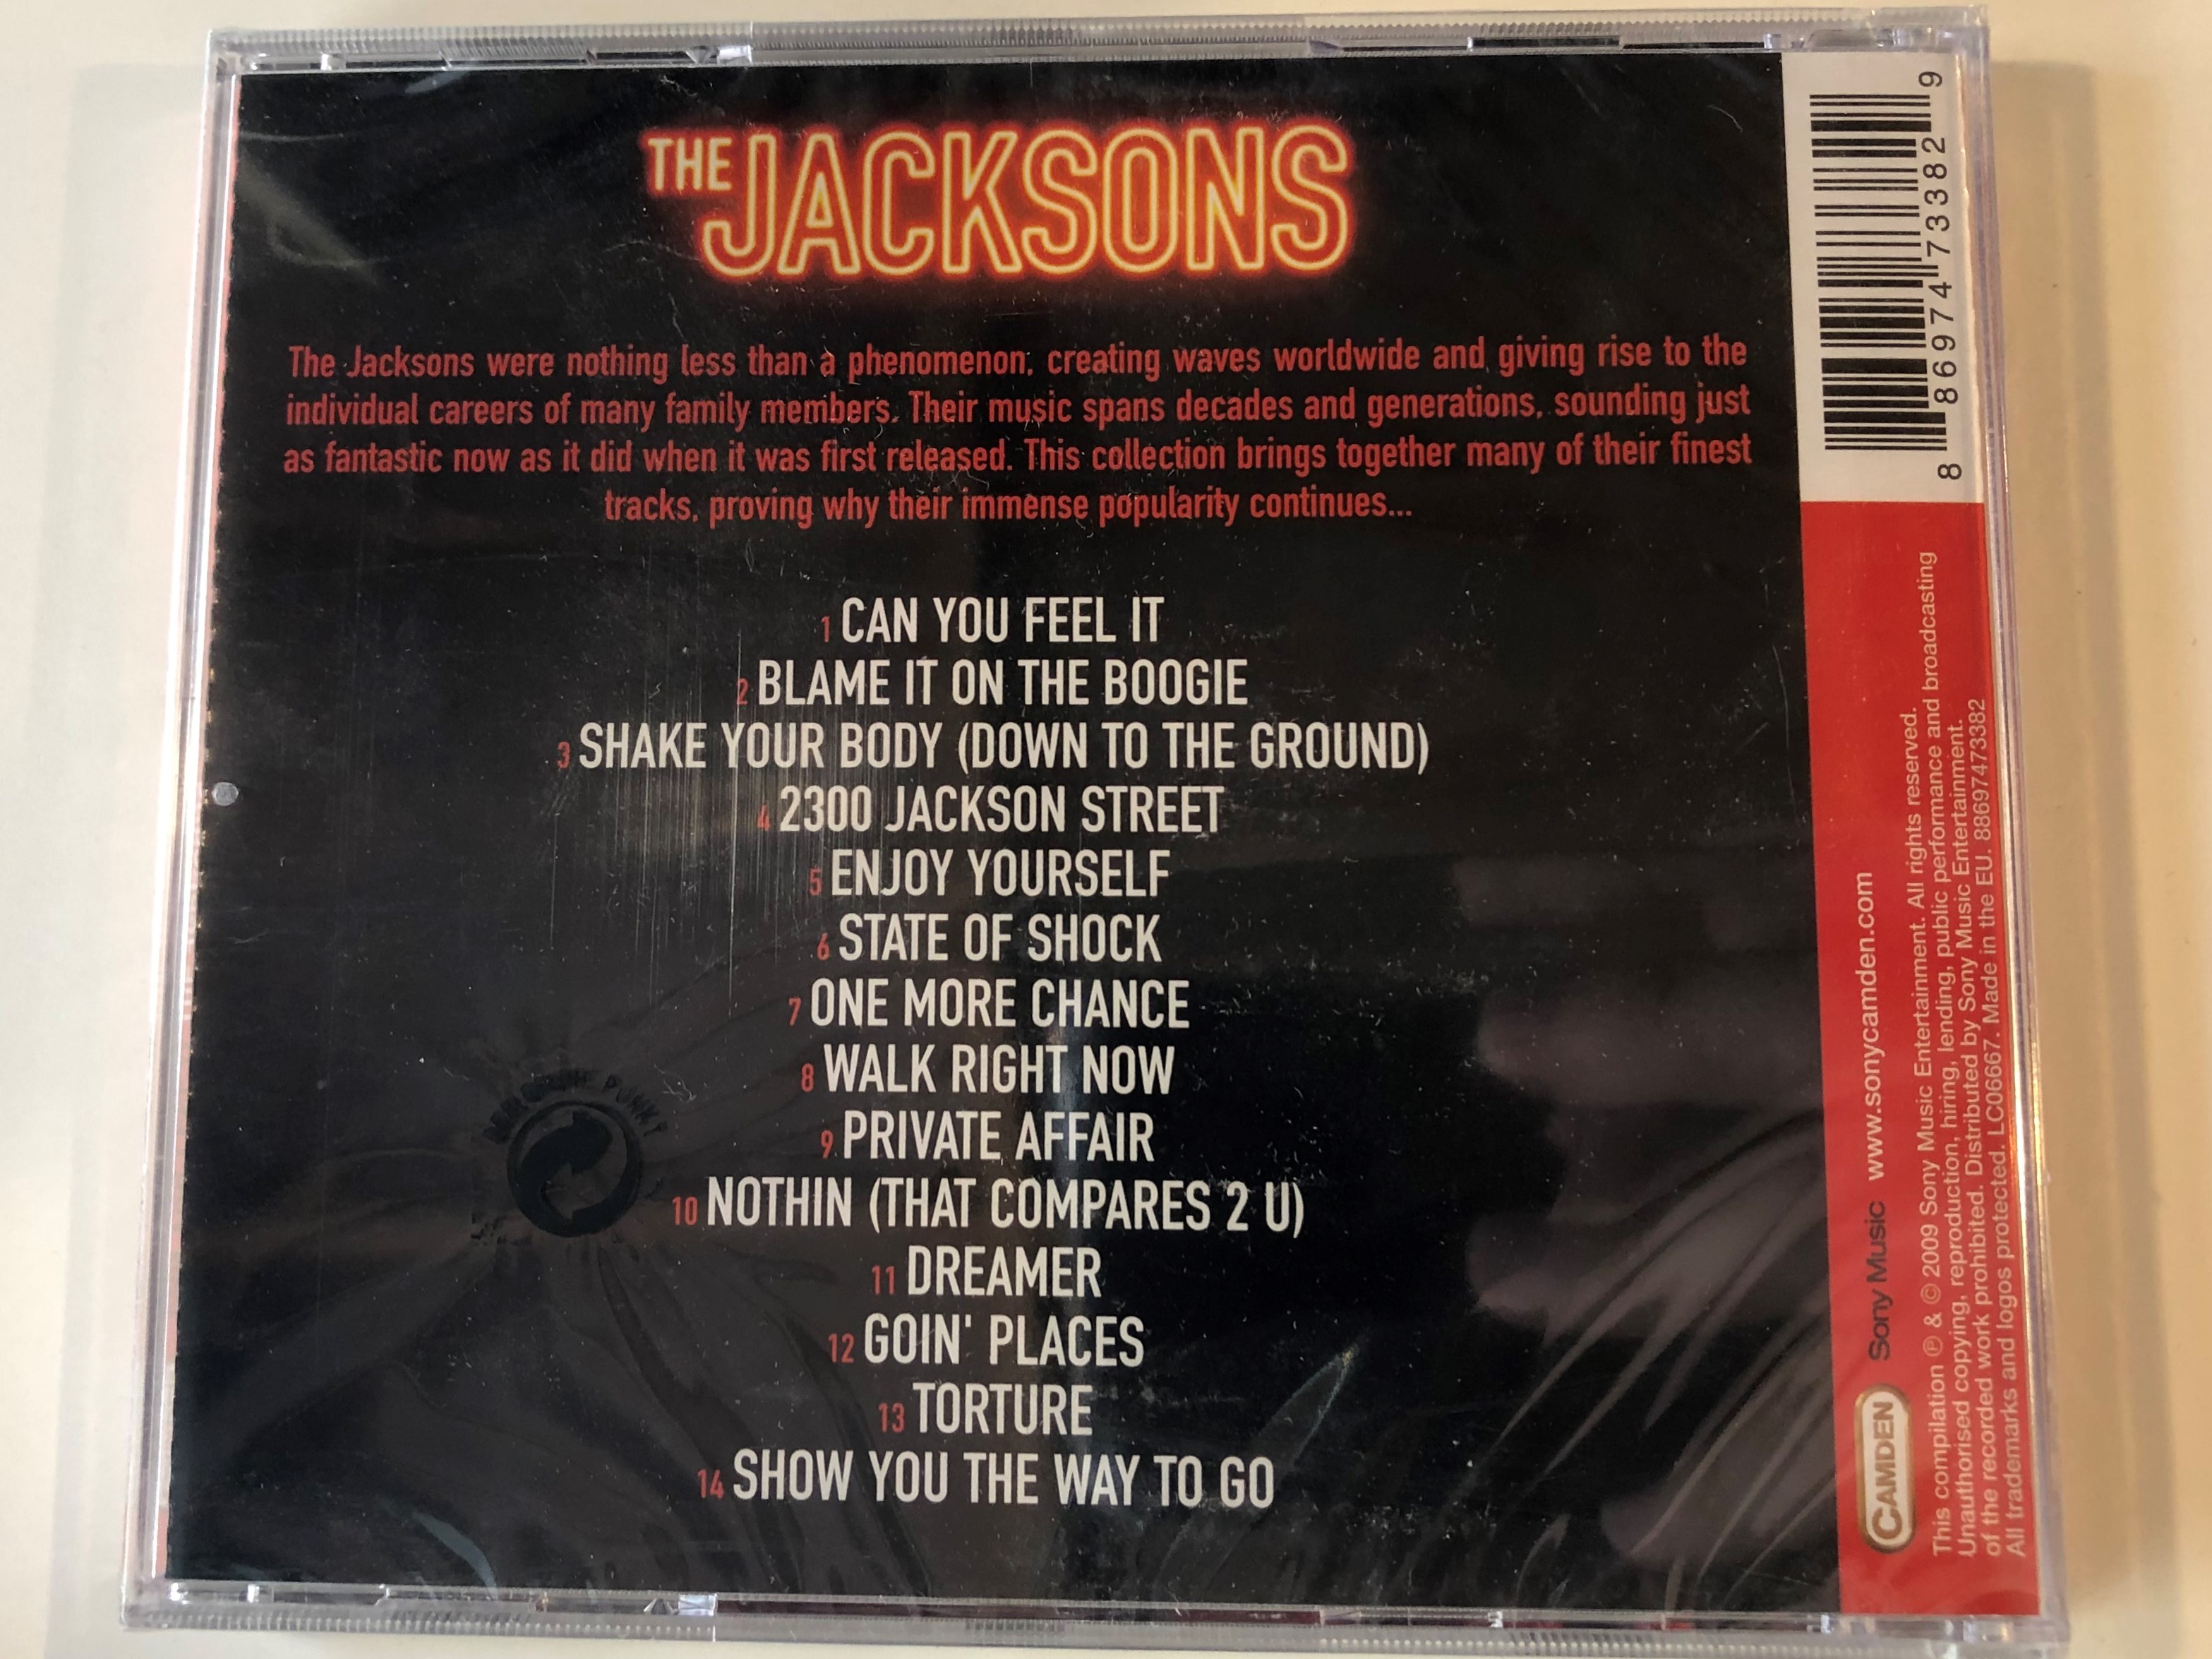 can-you-feel-it-the-jacksons-collection-sony-music-audio-cd-2009-88697473382-2-.jpg